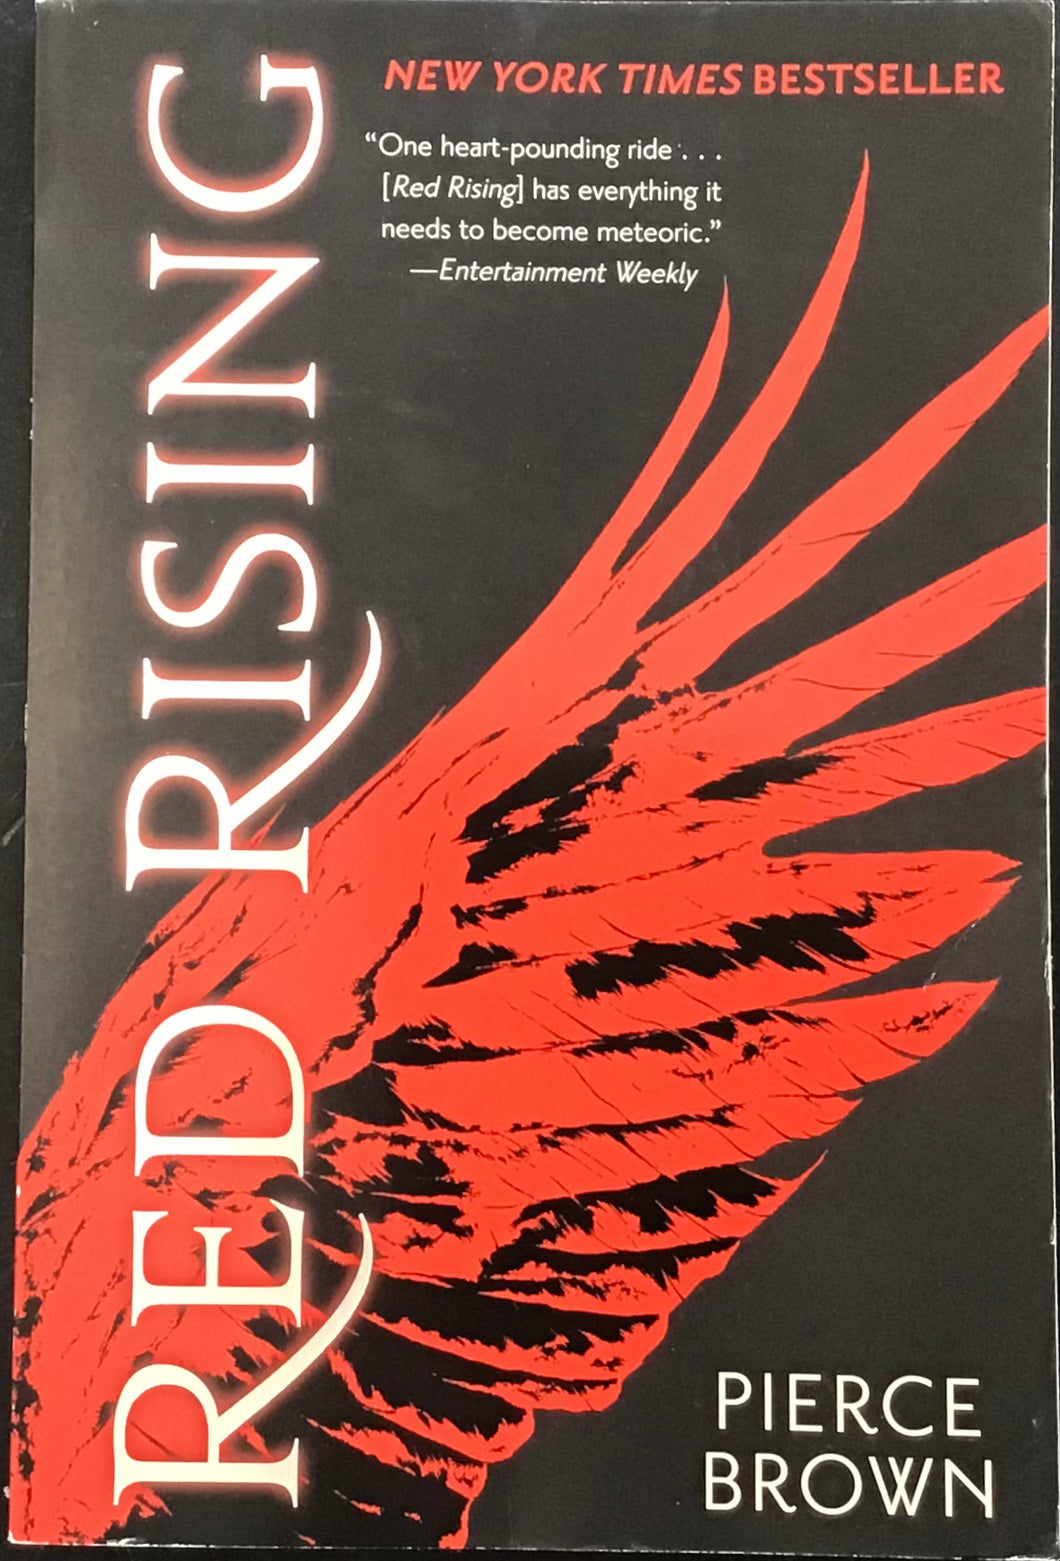 Red Rising, by Pierce Brown